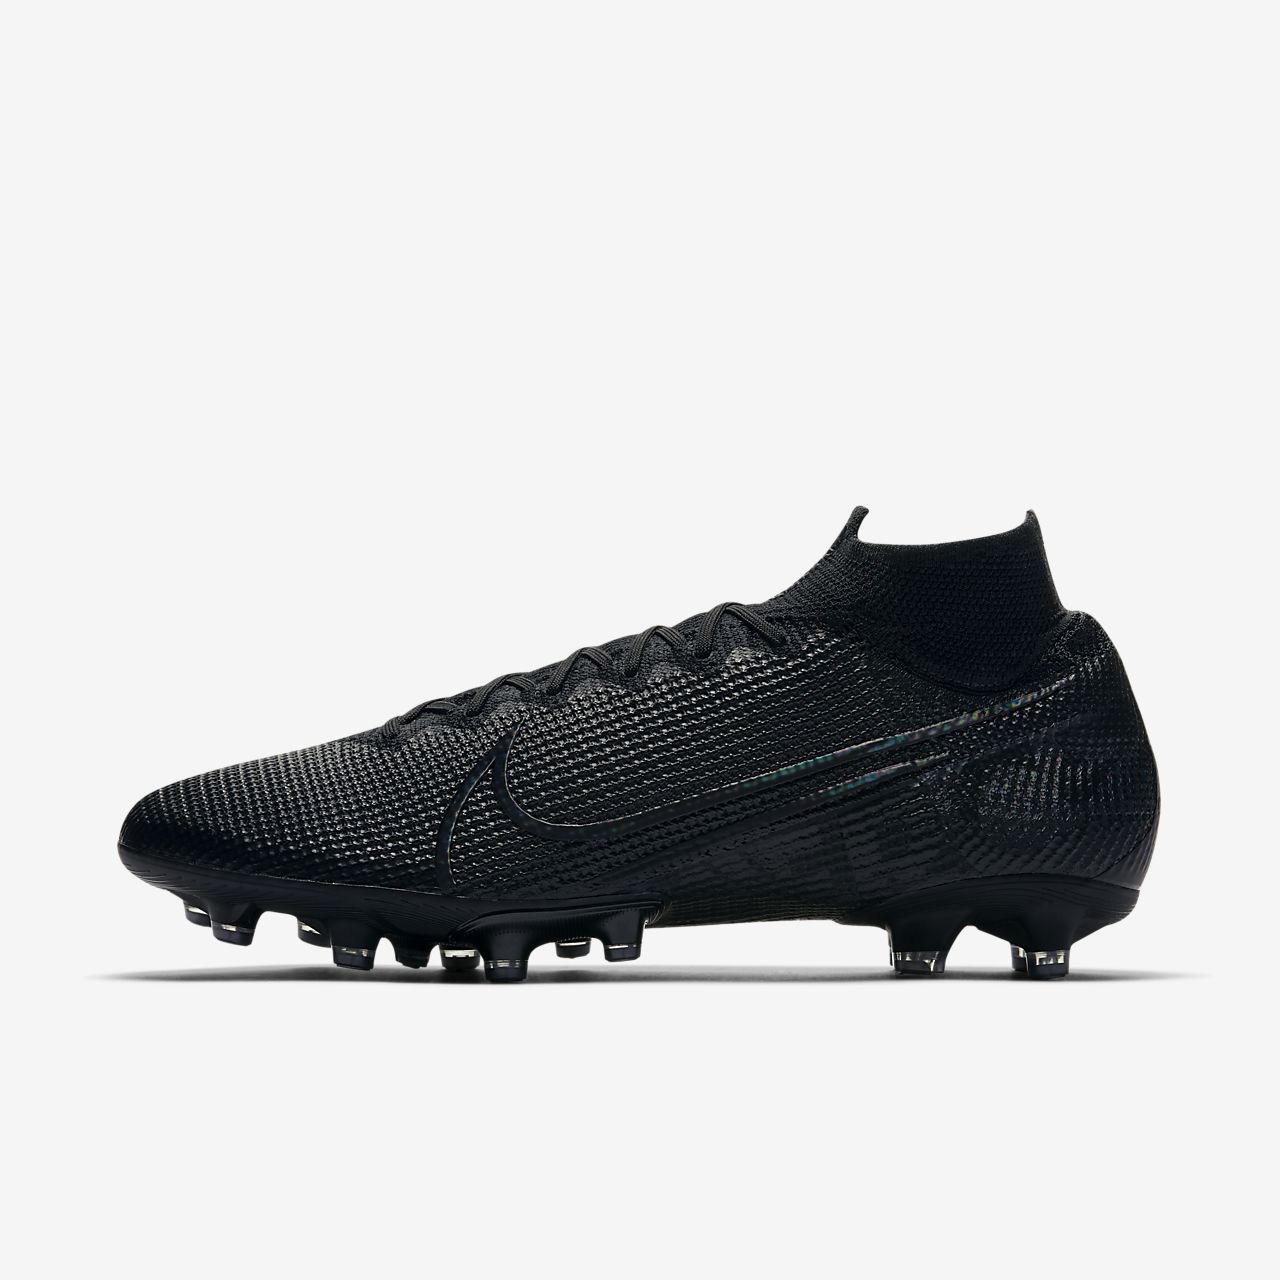 Nike Mercurial Superfly 6 Elite CR7 FG Soccer Cleats (Bright